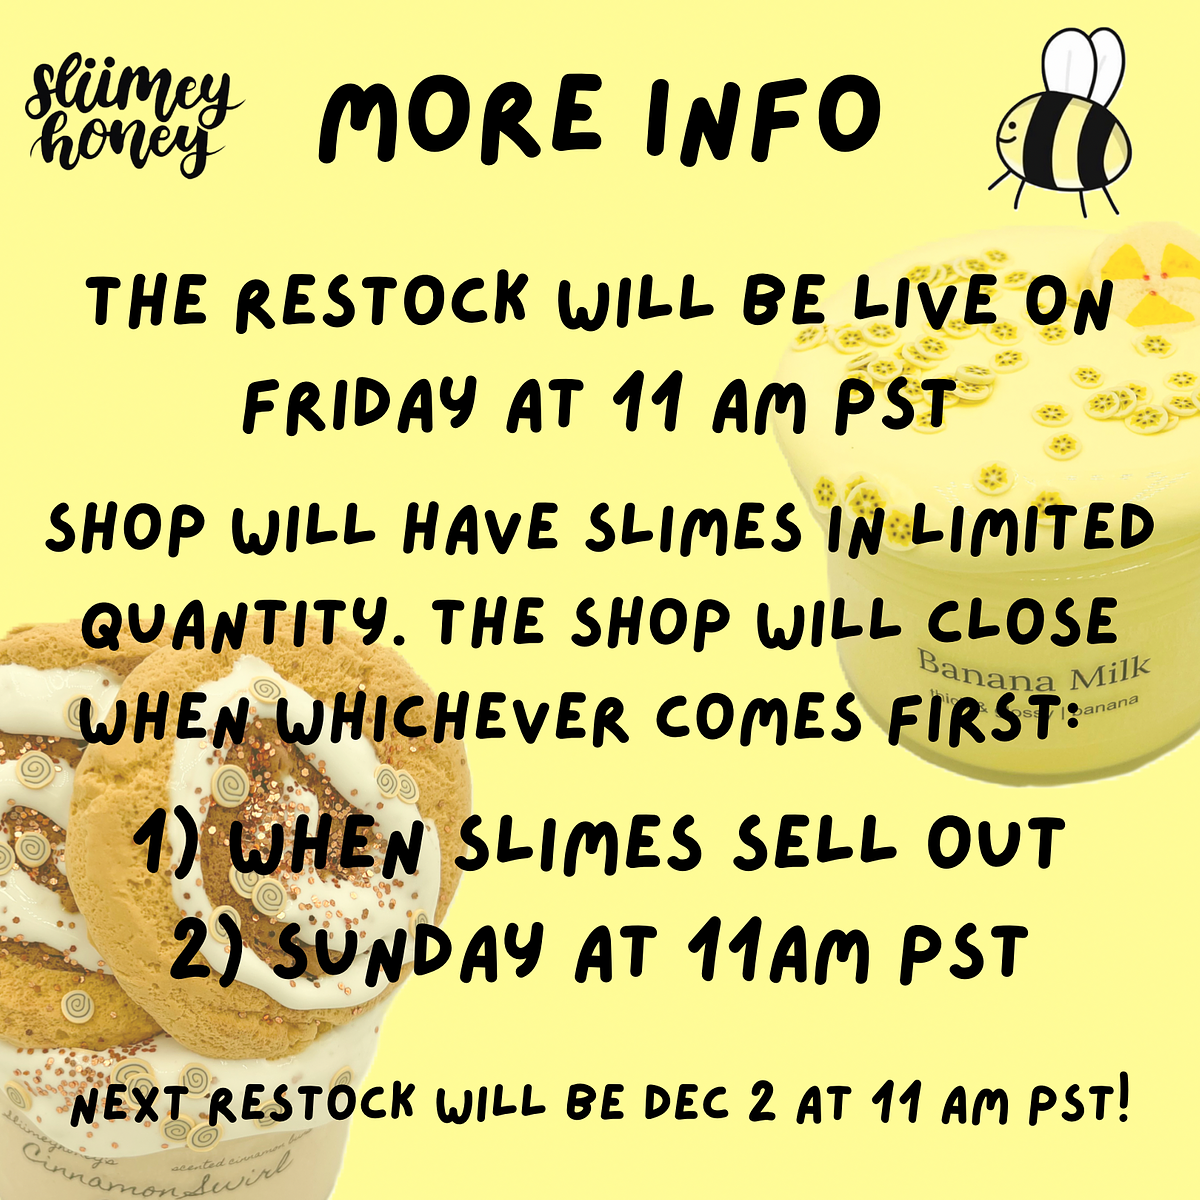 MORE INFO @ THE RESTOCK WILL BE LIVEON e FRIDAY AT 11 AM PST" o3 SHOP WILL HAVE SLIMES md-lmeo, - auag: ITY. THE SHOP WILL CLOSE EVER COMES F'RS? NEXT RESTOCK WILL BE DEC 2 AT 11 Am PST! A el 